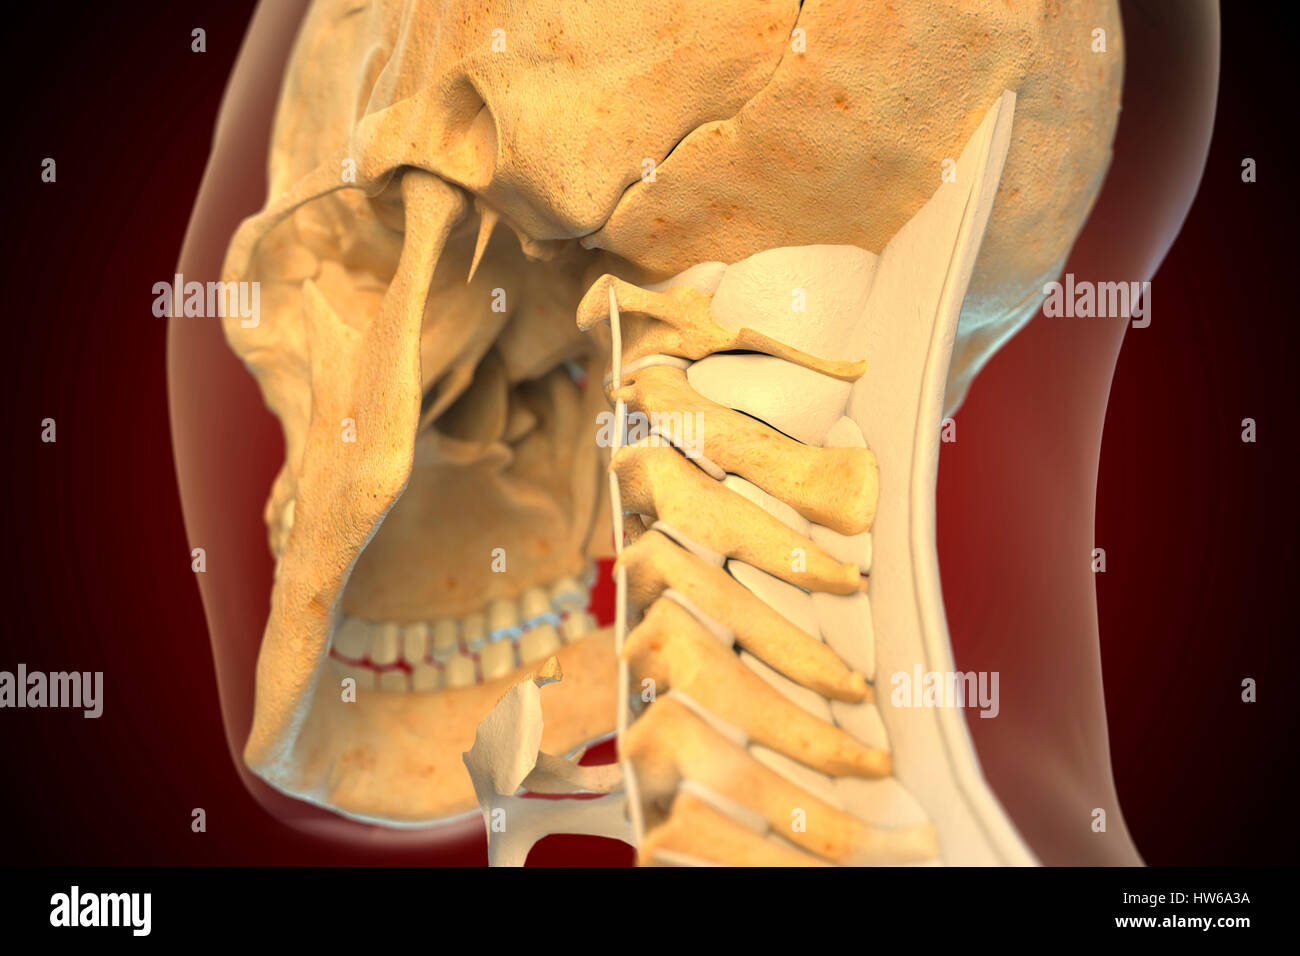 Ligaments of the human neck, illustration. Stock Photo